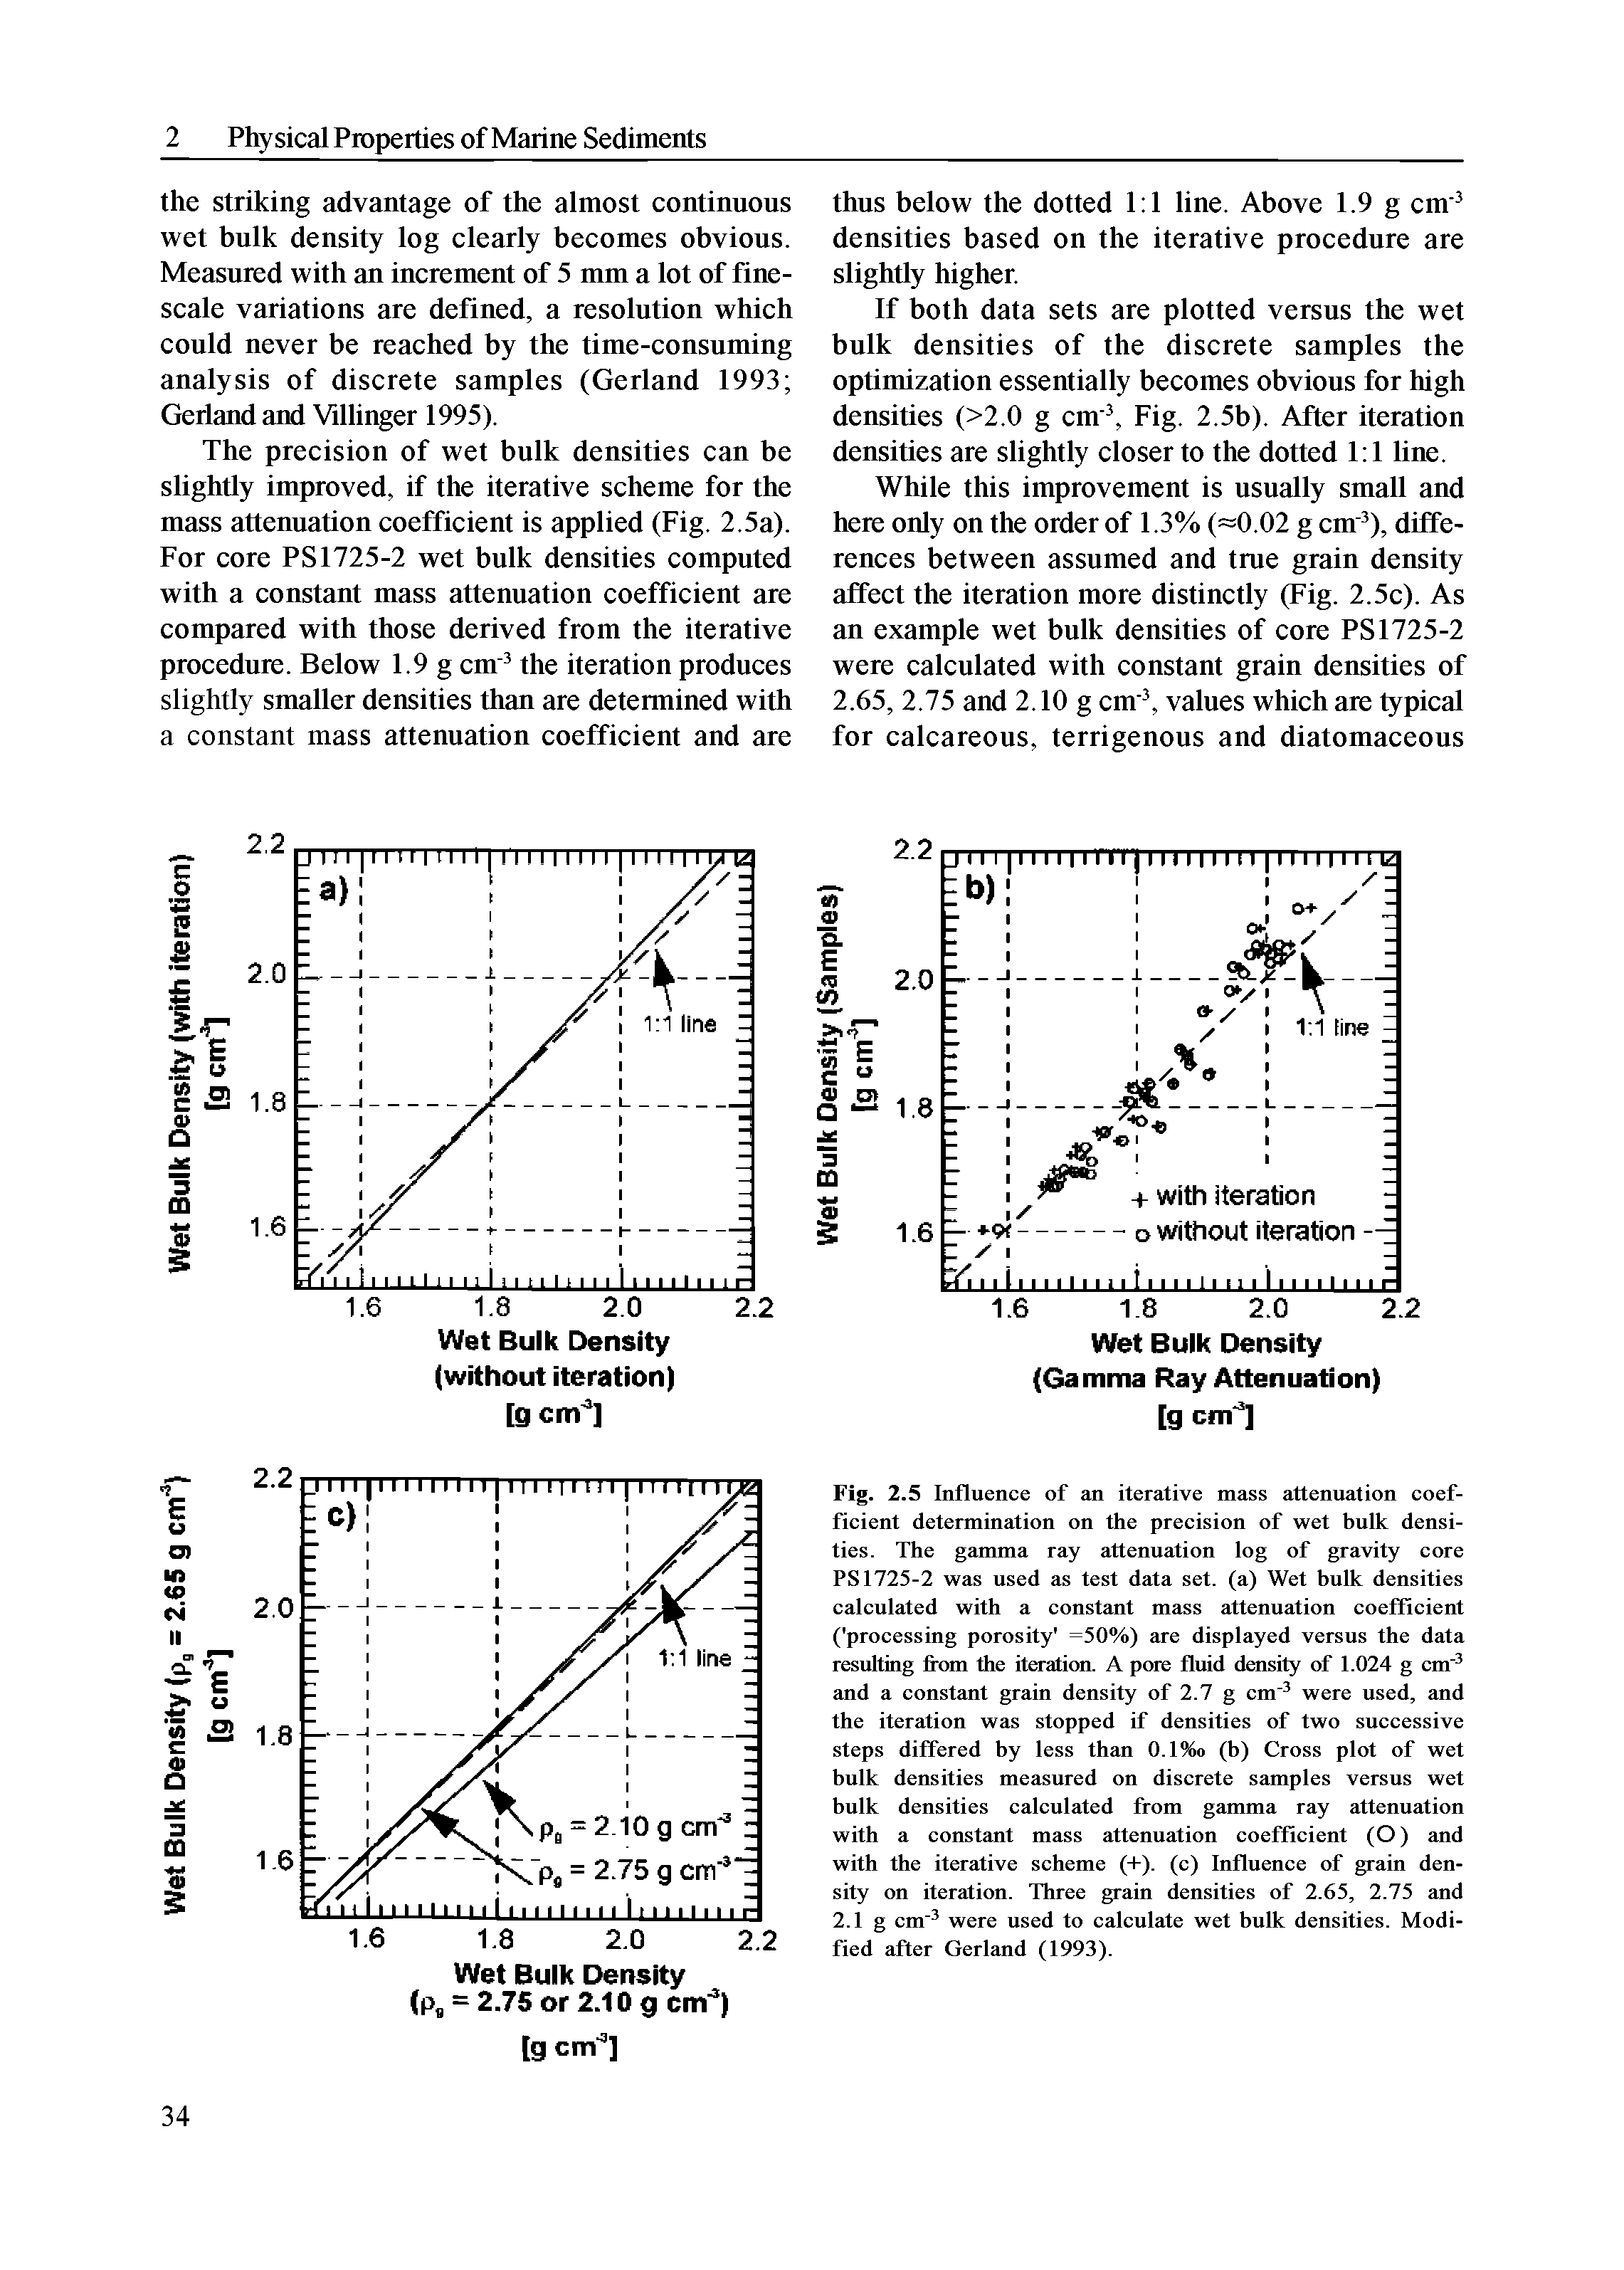 Fig. 2.5 Influence of an iterative mass attenuation coefficient determination on the precision of wet bulk densities. The gamma ray attenuation log of gravity core PS 1725-2 was used as test data set. (a) Wet bulk densities calculated with a constant mass attenuation coefficient ( processing porosity =50%) are displayed versus the data resulting from die iteration. A pore fluid density of 1.024 g cm and a constant grain density of 2.7 g cm were used, and the iteration was stopped if densities of two successive steps differed by less than 0.1%o (b) Cross plot of wet bulk densities measured on discrete samples versus wet bulk densities calculated from gamma ray attenuation with a constant mass attenuation coefficient (O) and with the iterative scheme (+). (c) Influence of grain density on iteration. Three grain densities of 2.65, 2.75 and 2.1 g cm were used to calculate wet bulk densities. Modified after Gerland (1993).